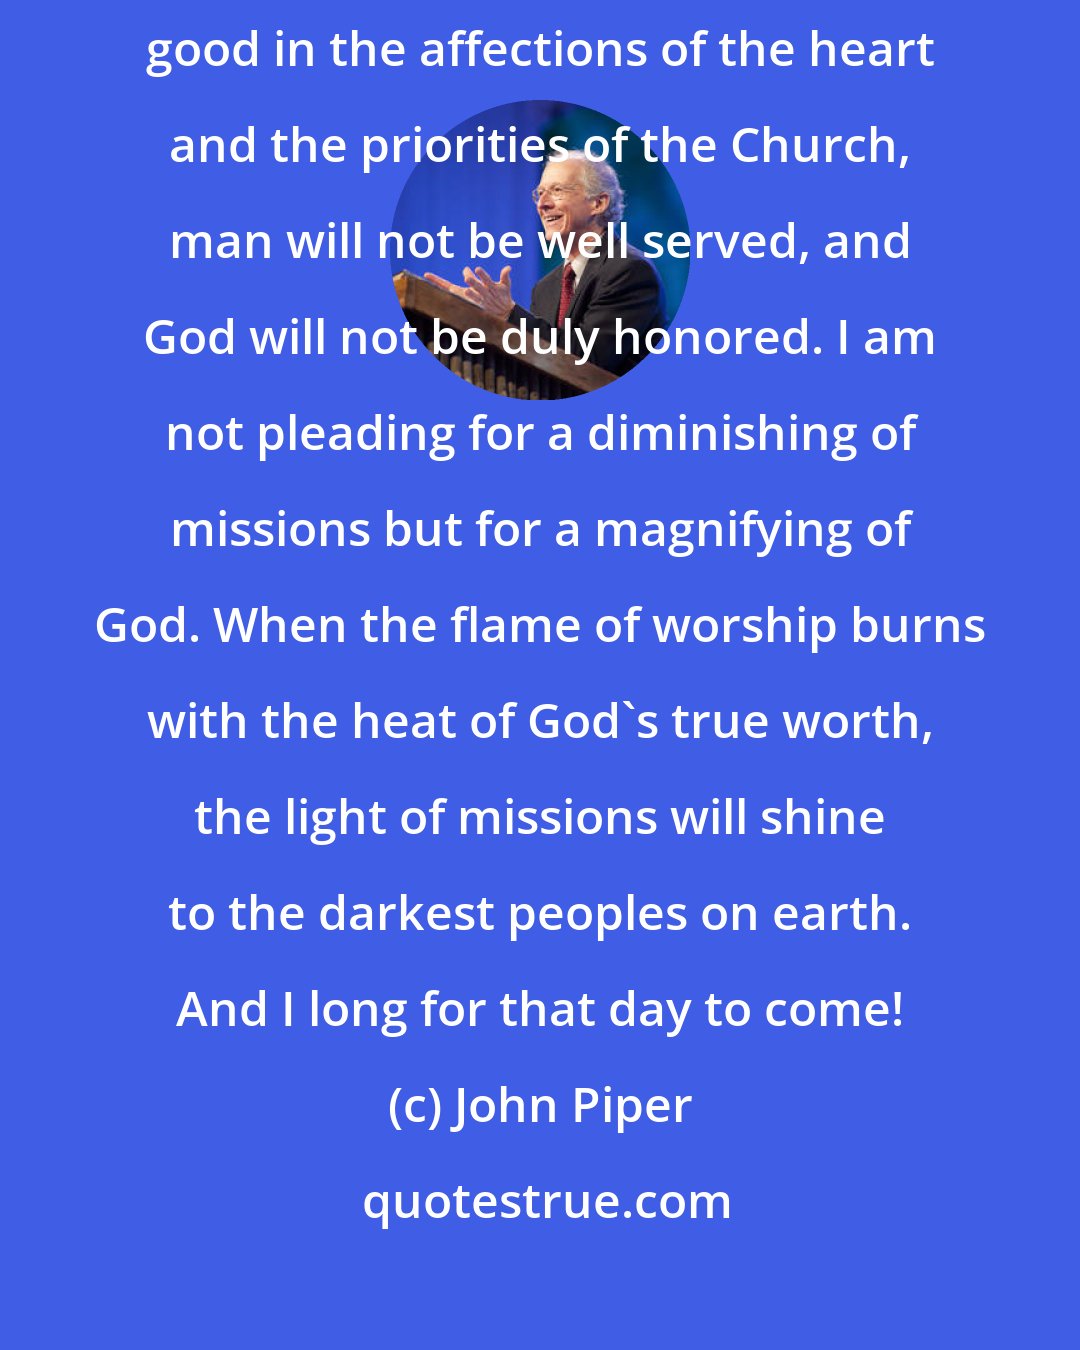 John Piper: If the pursuit of God's glory is not ordered above the pursuit of man's good in the affections of the heart and the priorities of the Church, man will not be well served, and God will not be duly honored. I am not pleading for a diminishing of missions but for a magnifying of God. When the flame of worship burns with the heat of God's true worth, the light of missions will shine to the darkest peoples on earth. And I long for that day to come!